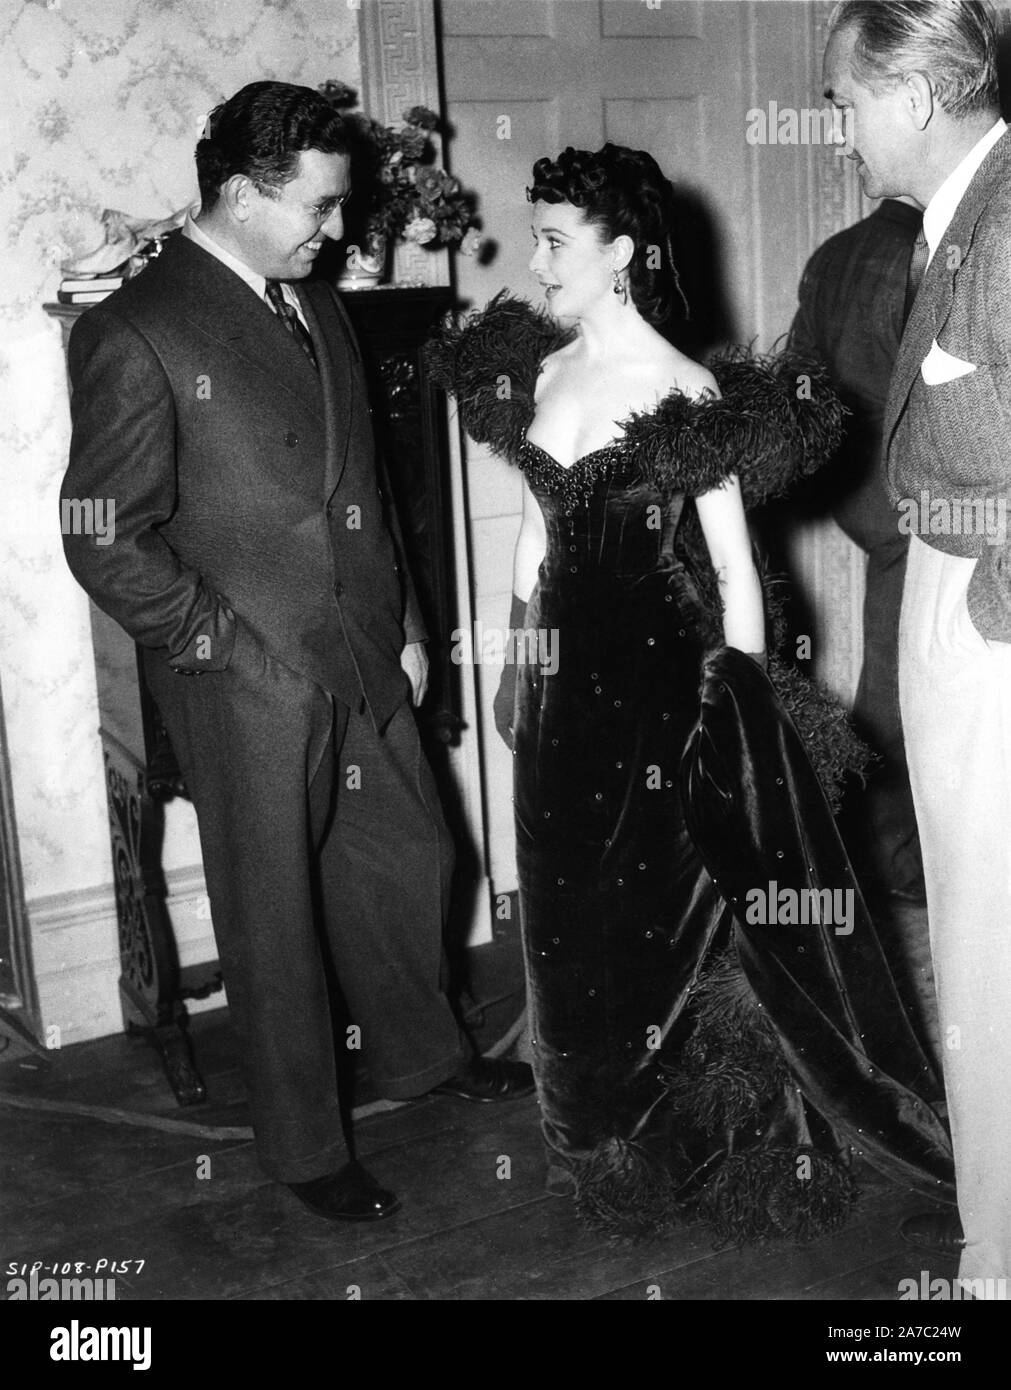 Producer DAVID O. SELZNICK VIVIEN LEIGH as Scarlett O'Hara in red dress and  Director VICTOR FLEMING on set candid during filming of GONE WITH THE WIND  1939 director Victor Fleming novel Margaret